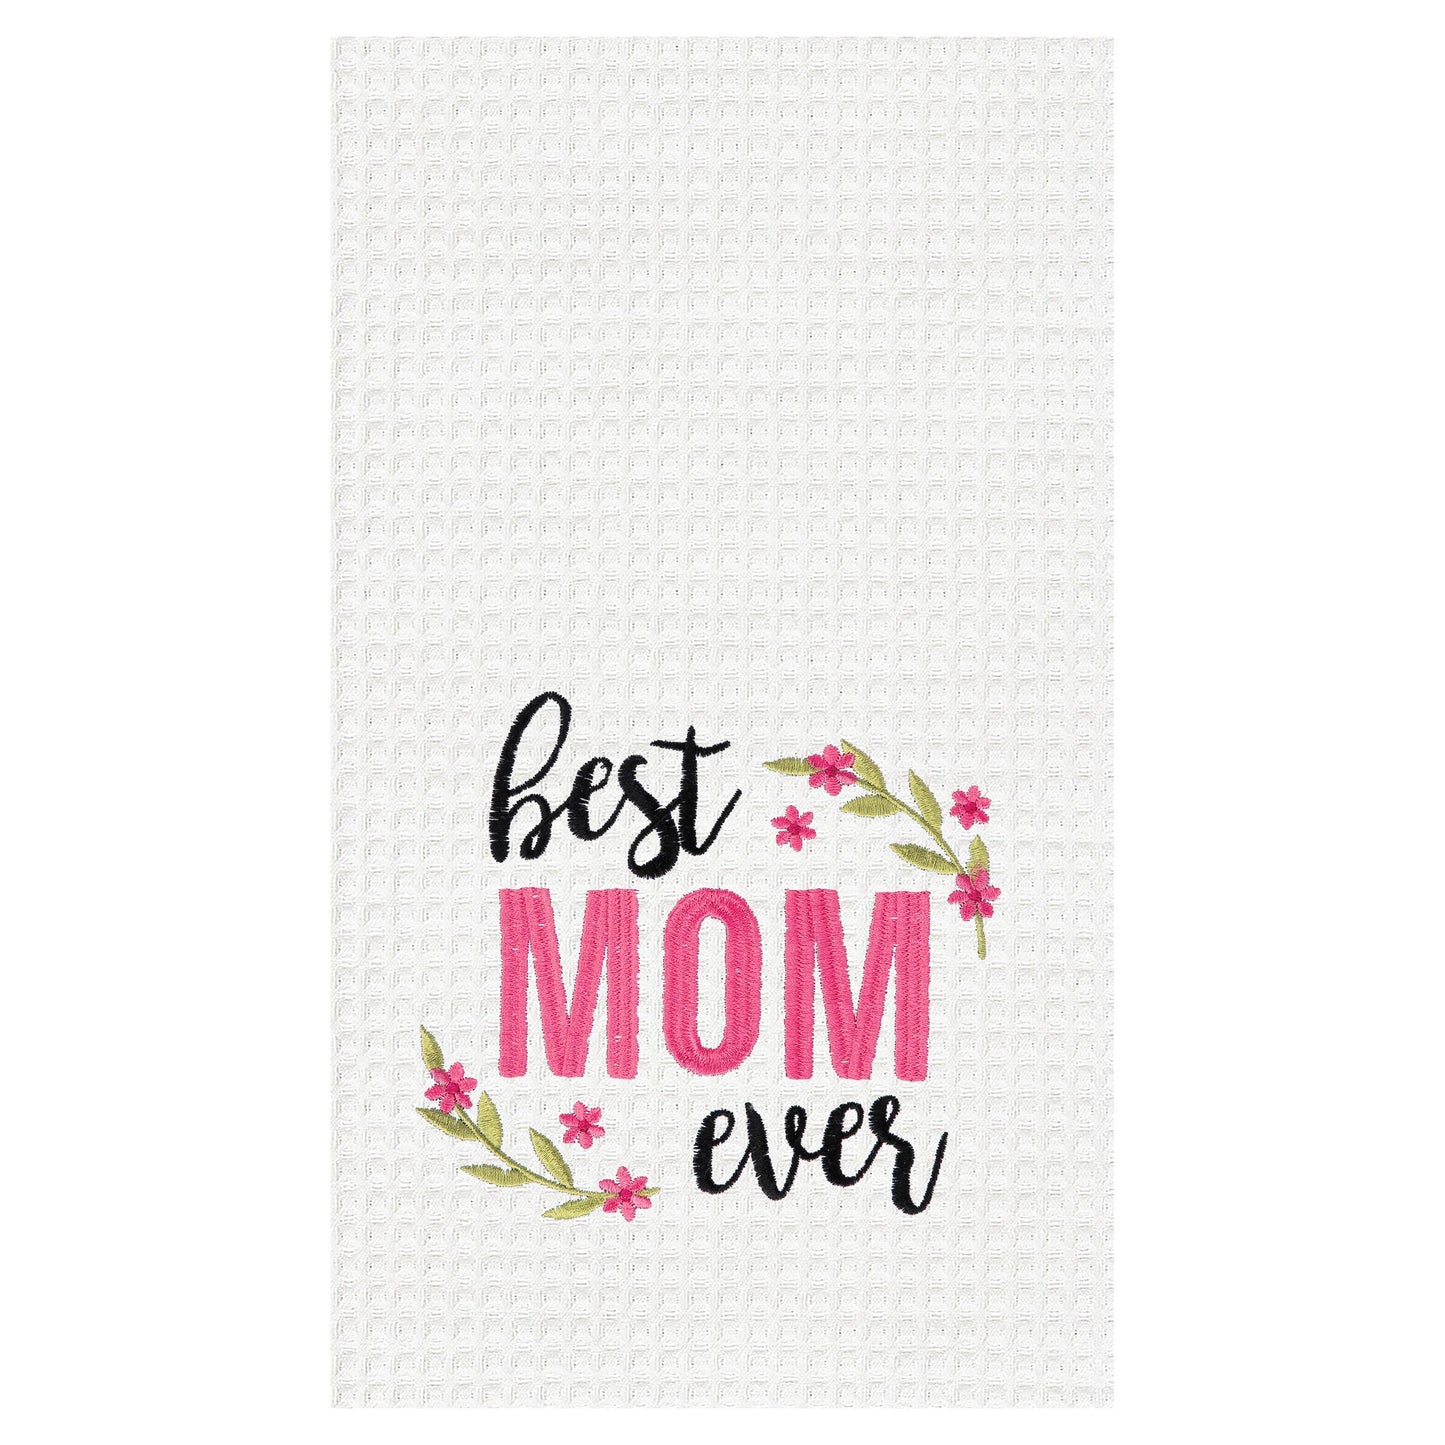 Best Mother Ever - Embroidered Kitchen Towel - Embroidery Decorative Towel  - Housewarming Gift - Hostess Gift - Mom Stepmom 